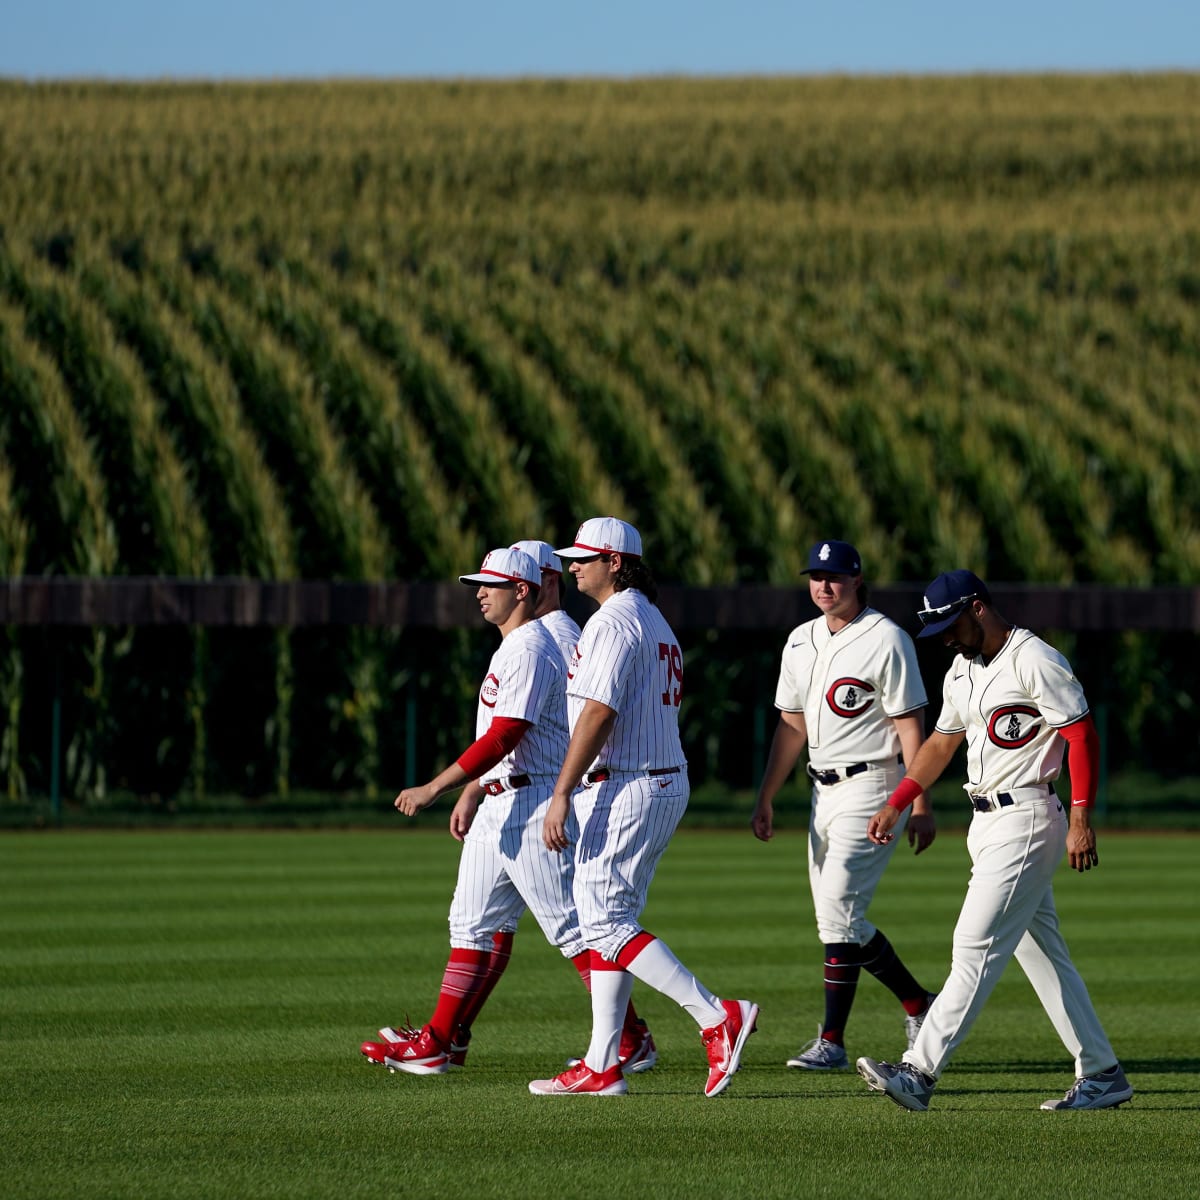 Fans Love The Reds And Cubs' 2022 Field of Dreams Game Uniforms